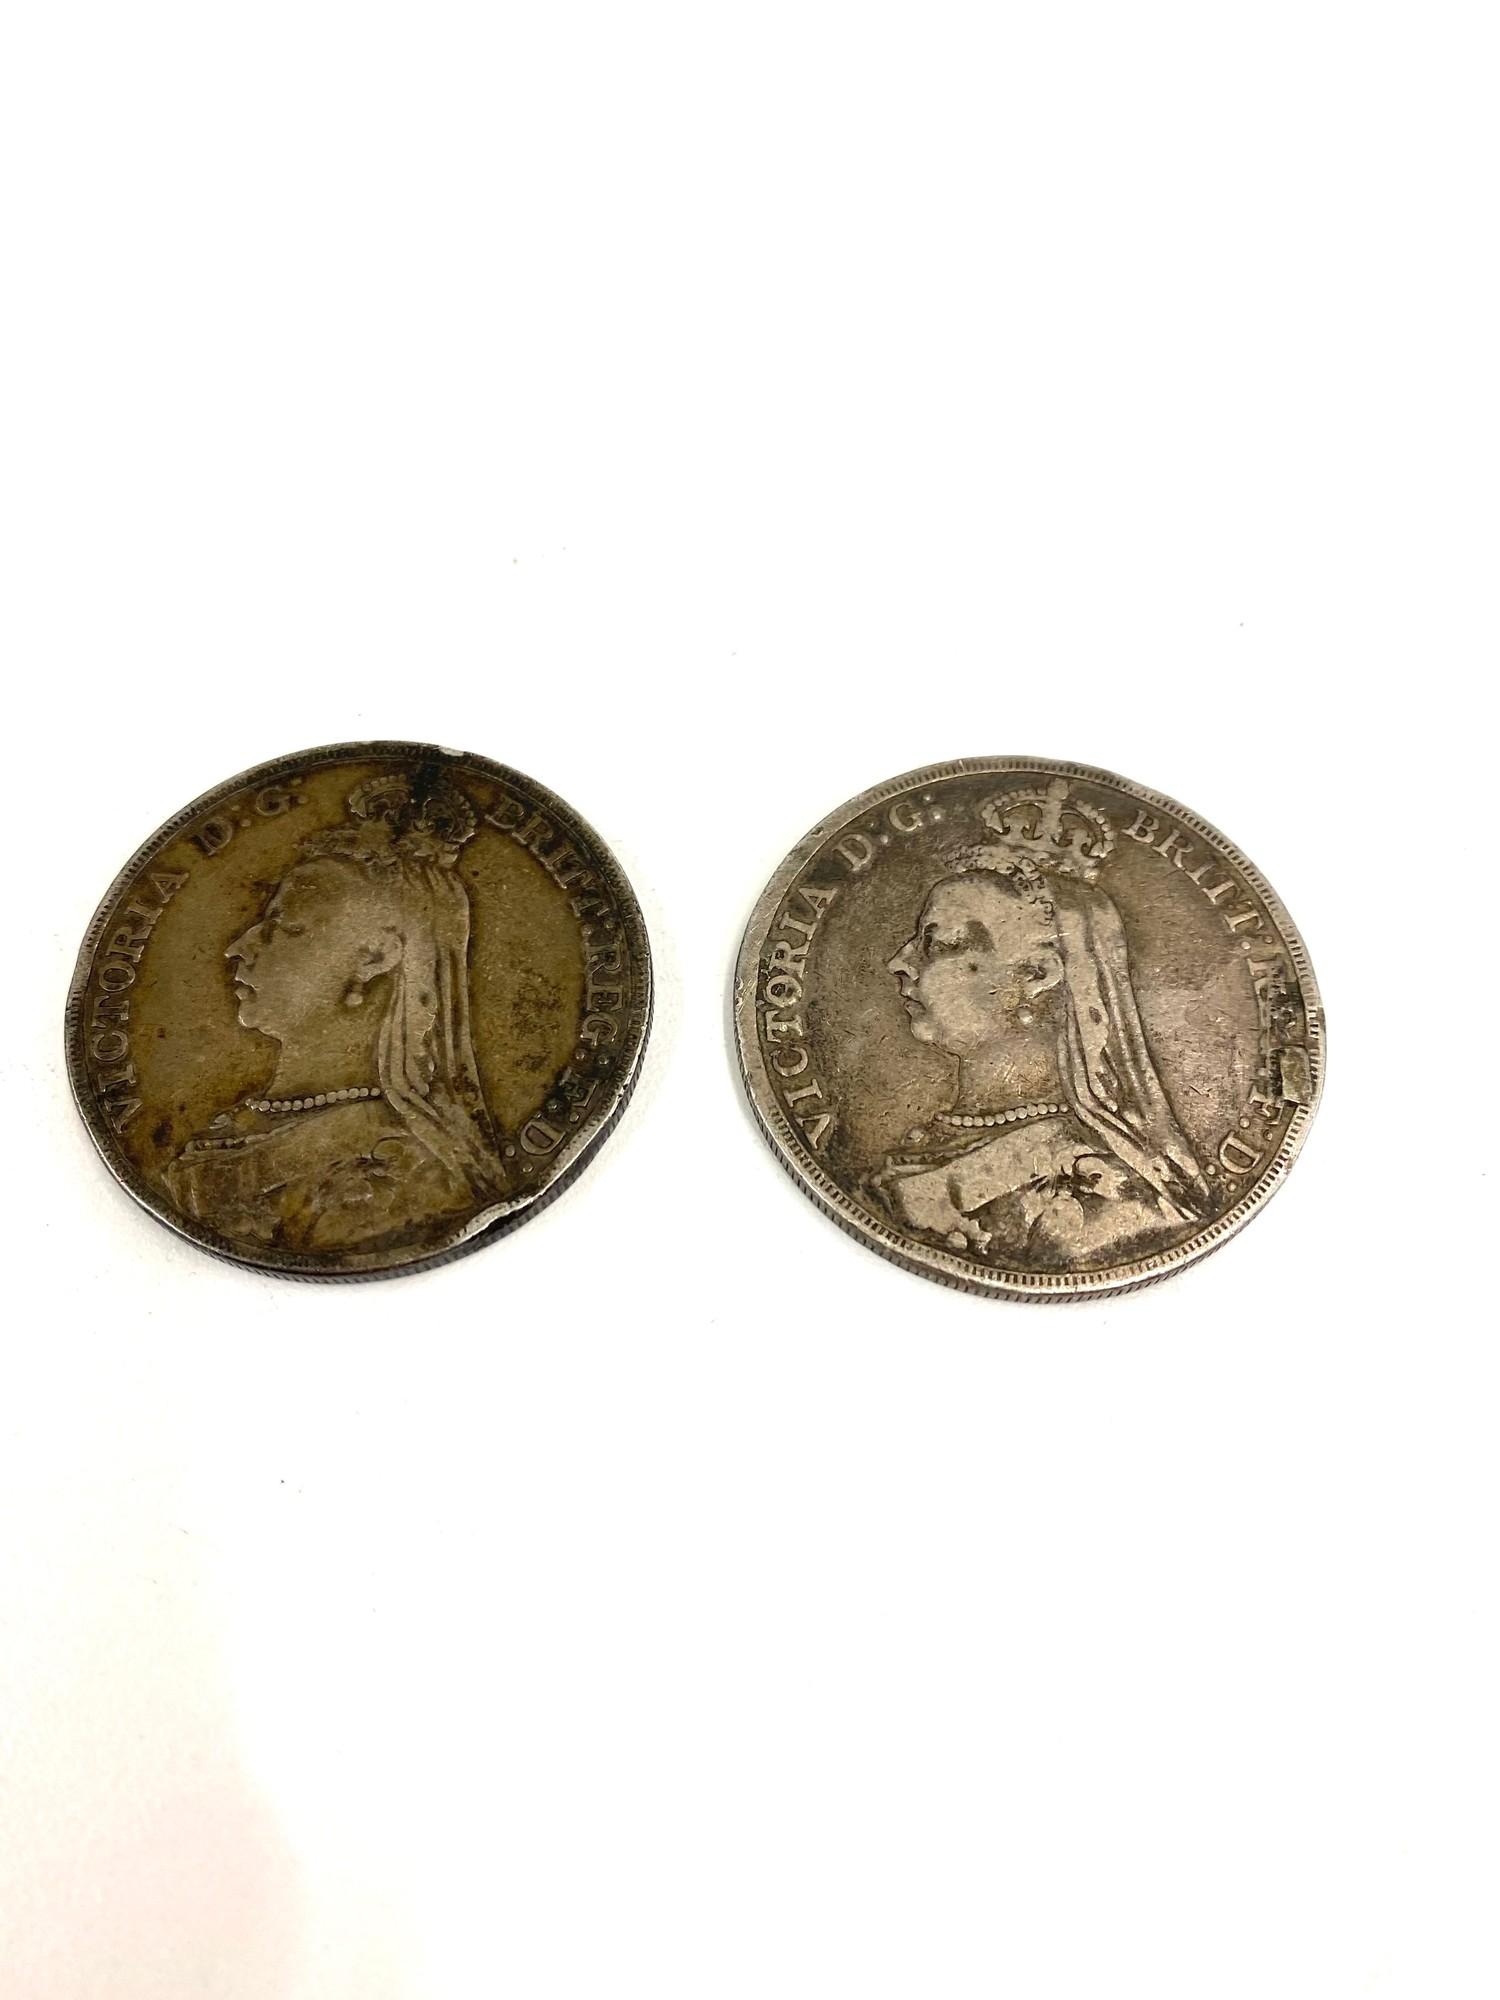 2 Victorian silver crown coins, 1889, 1892 - Image 2 of 2